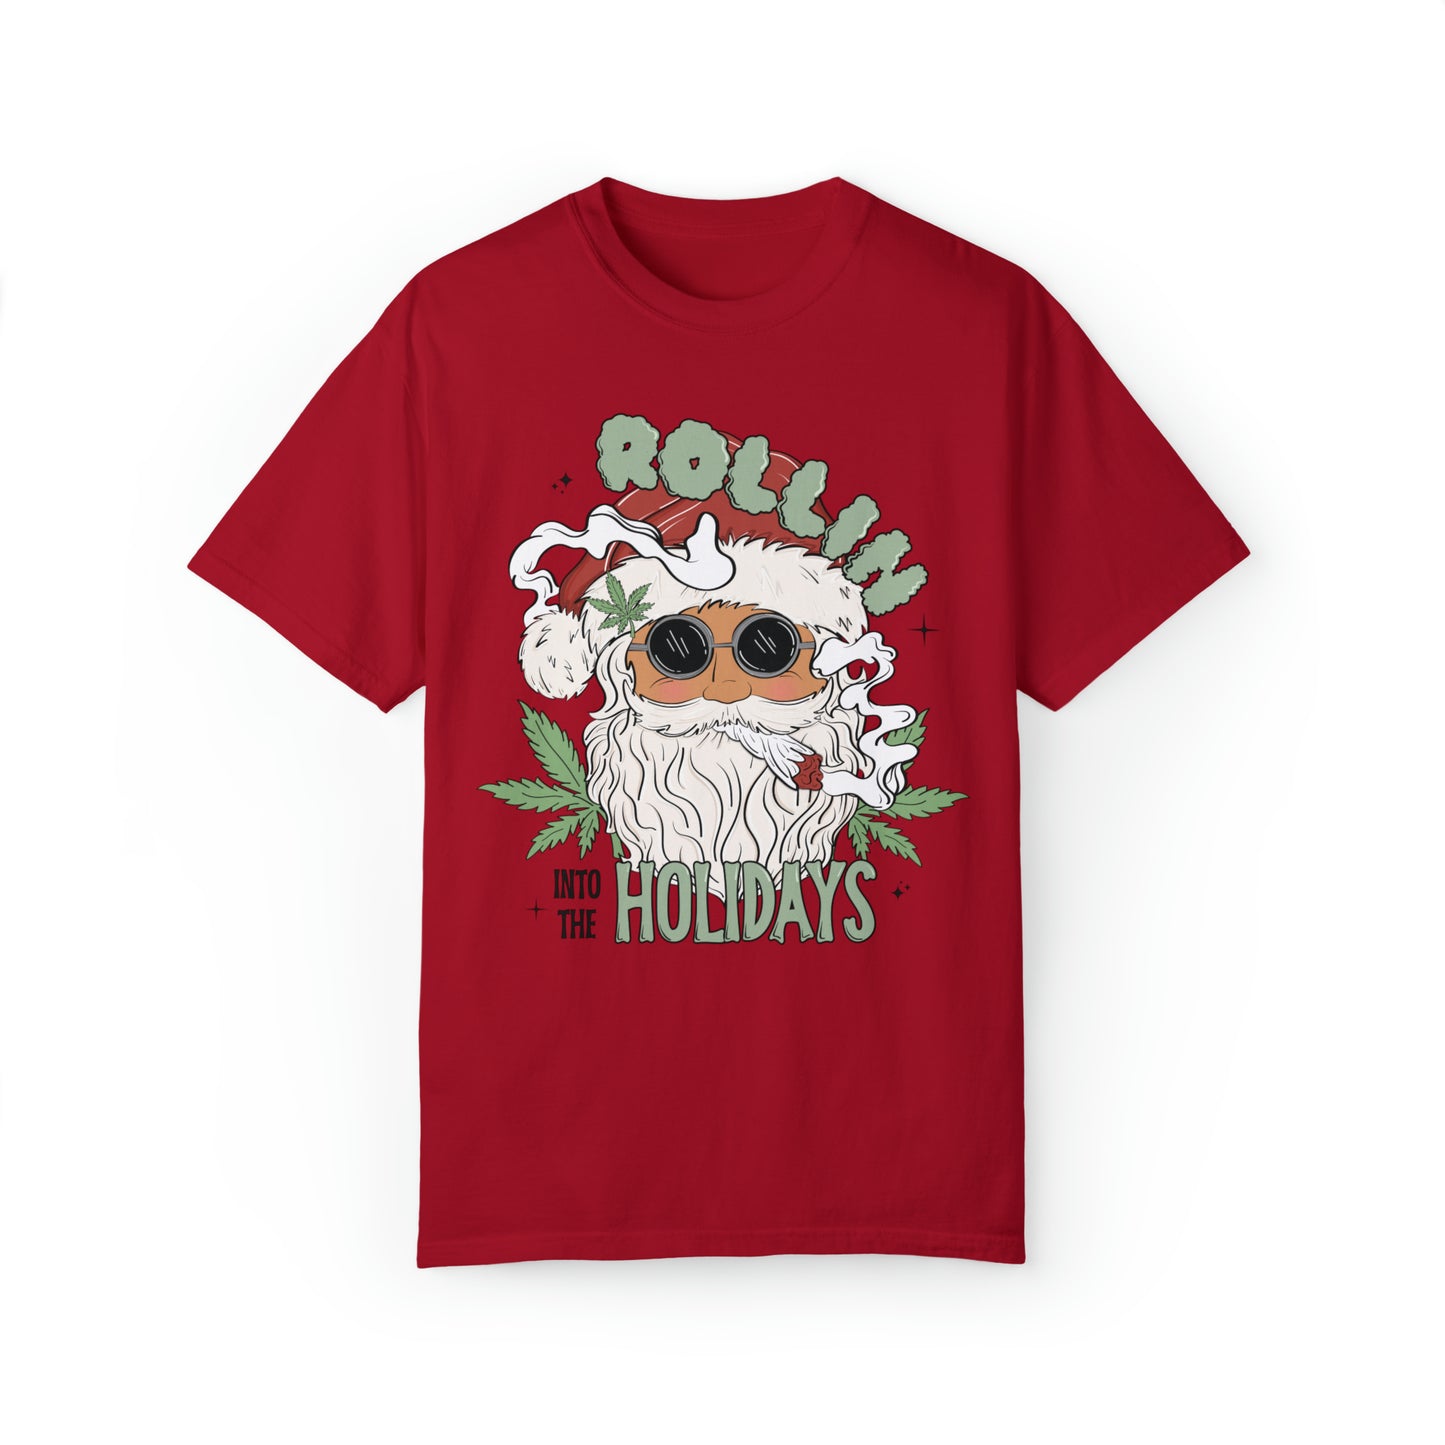 Rollin into the Holidays Shirt